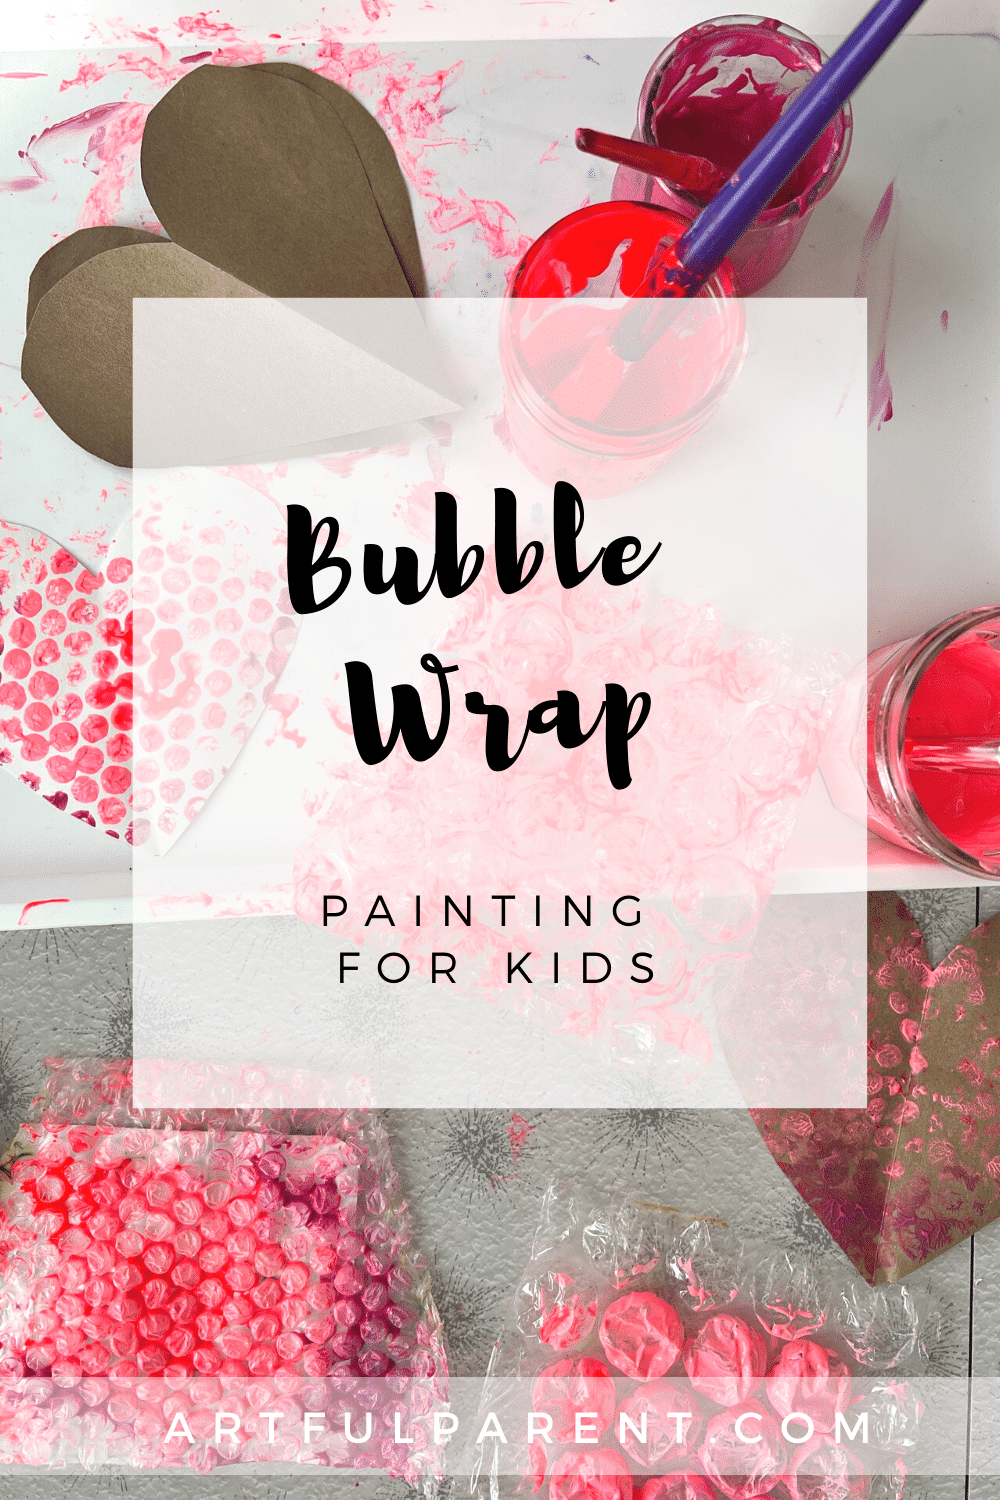 Painting with Bubble Wrap for Kids